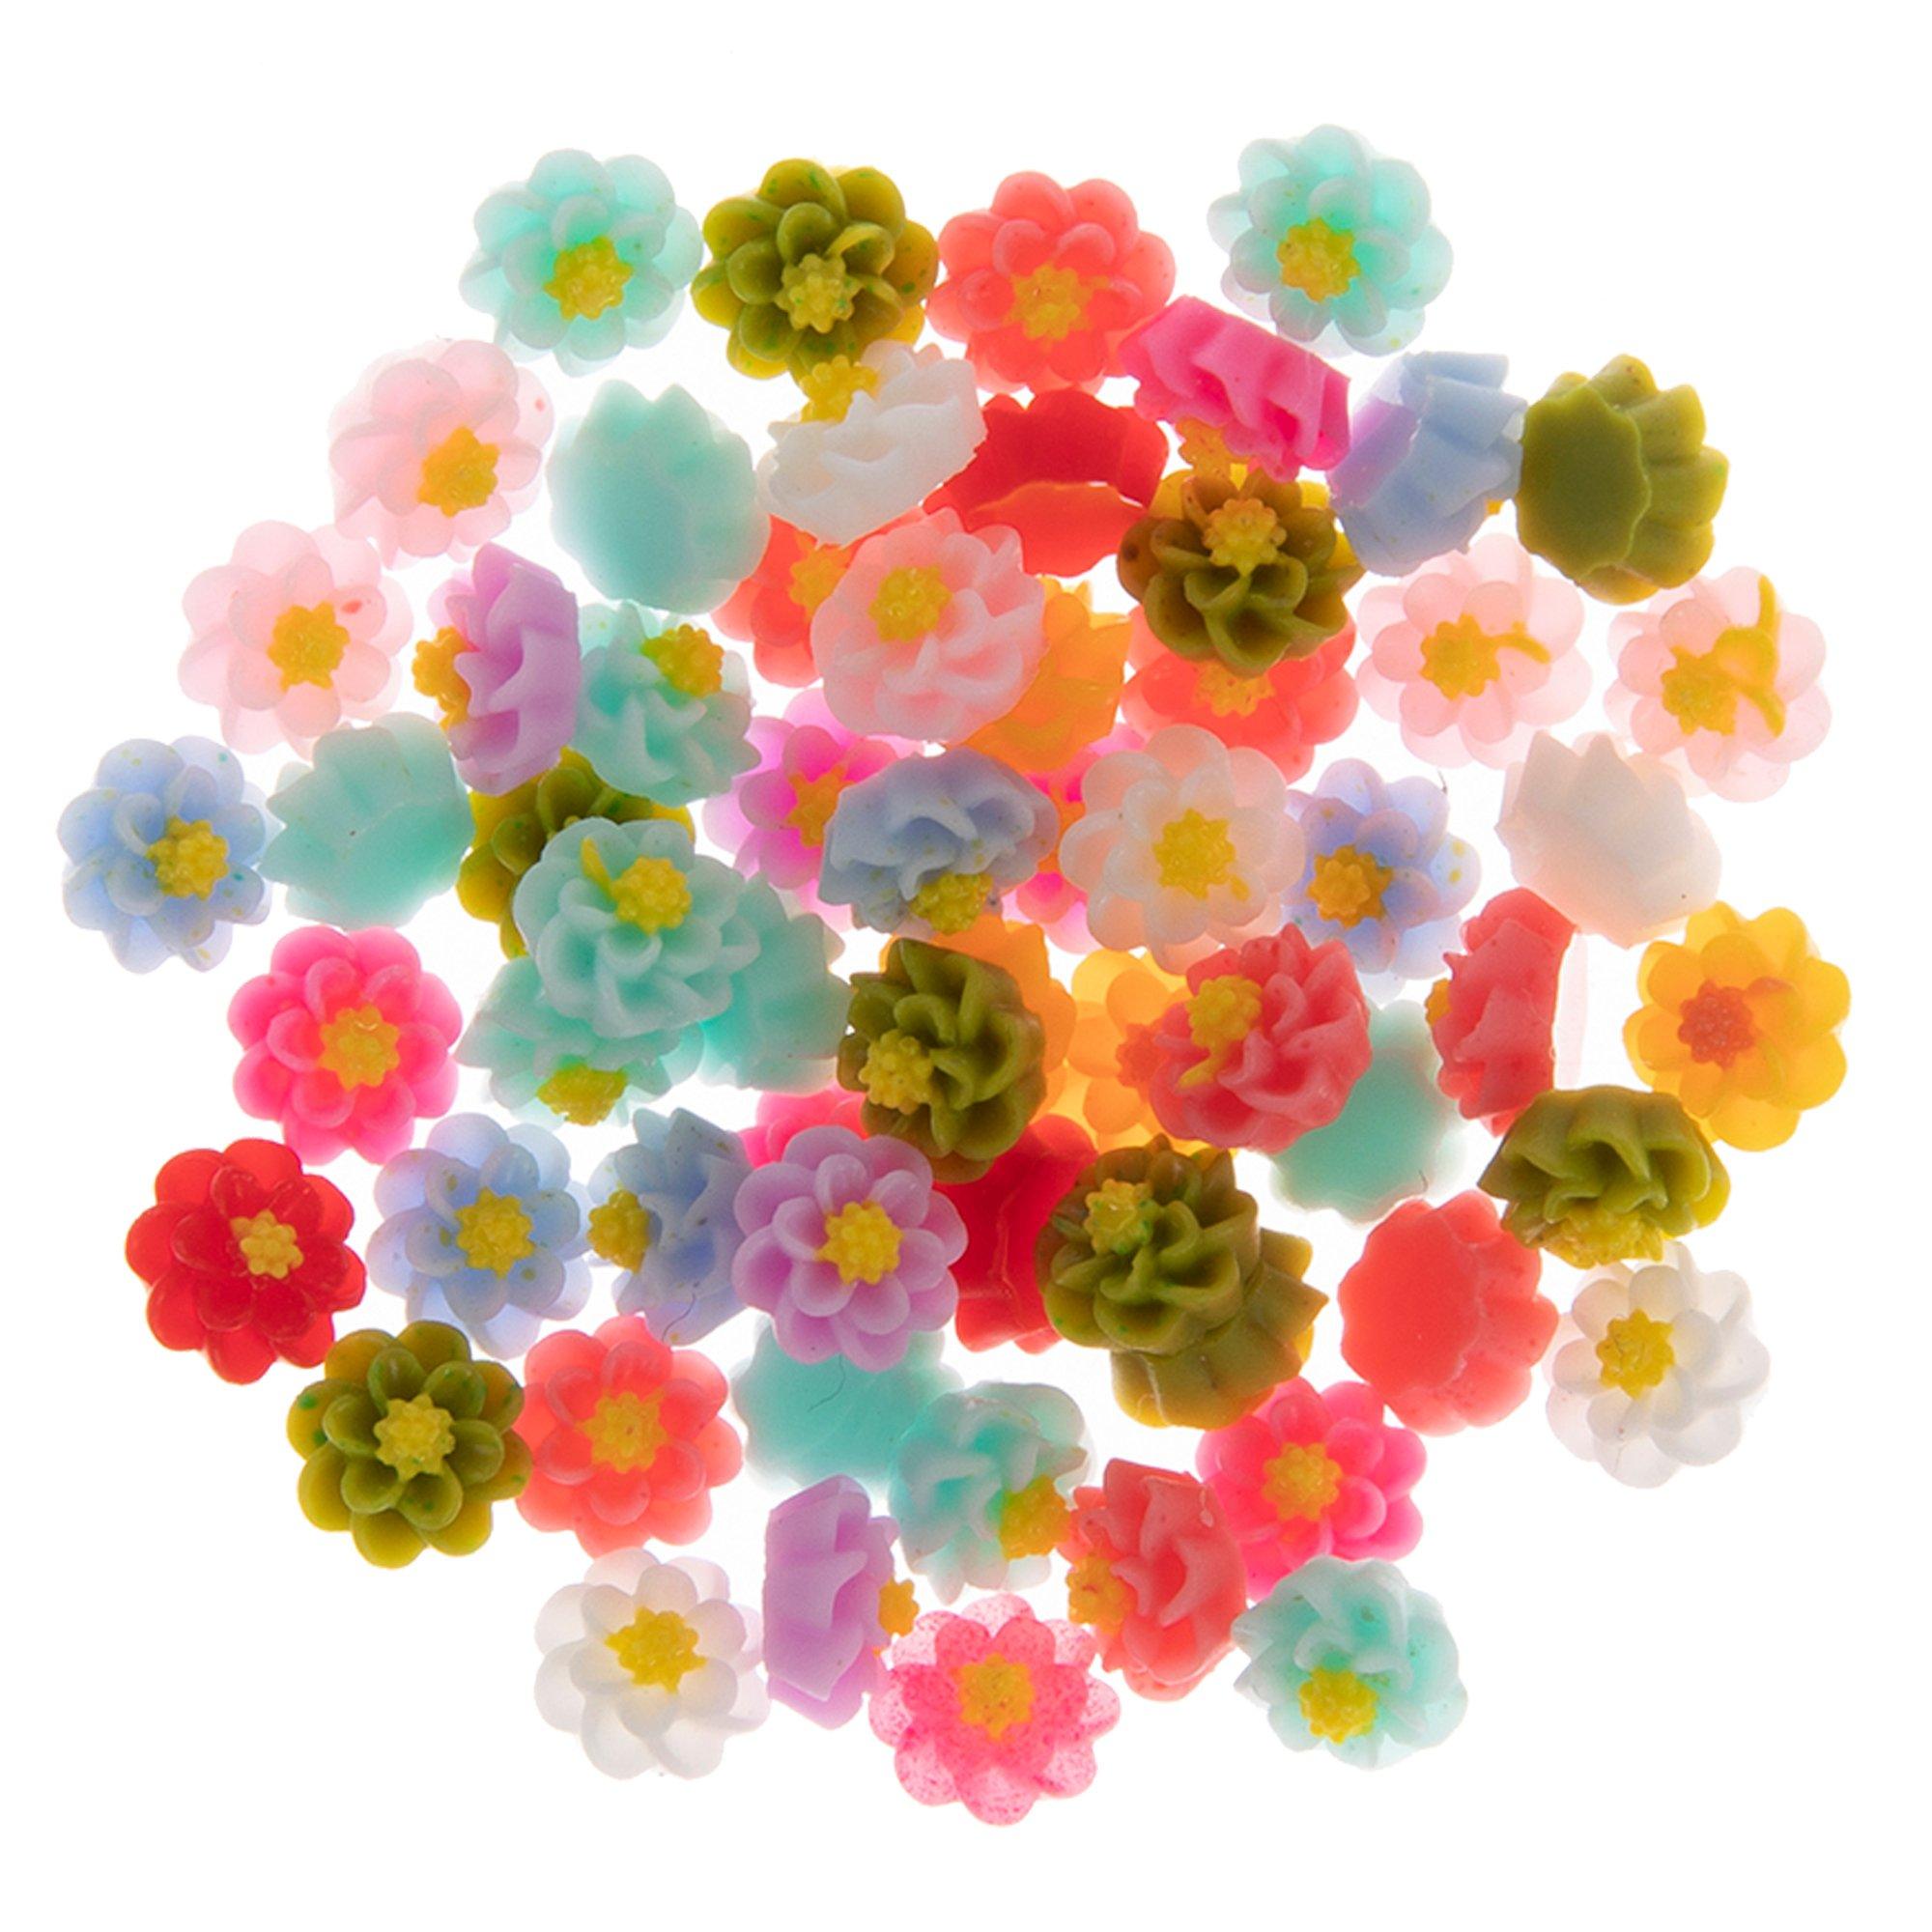 Hello Hobby Multicolor Flower Pressing Kit, 36 Pieces Adult, Unisex